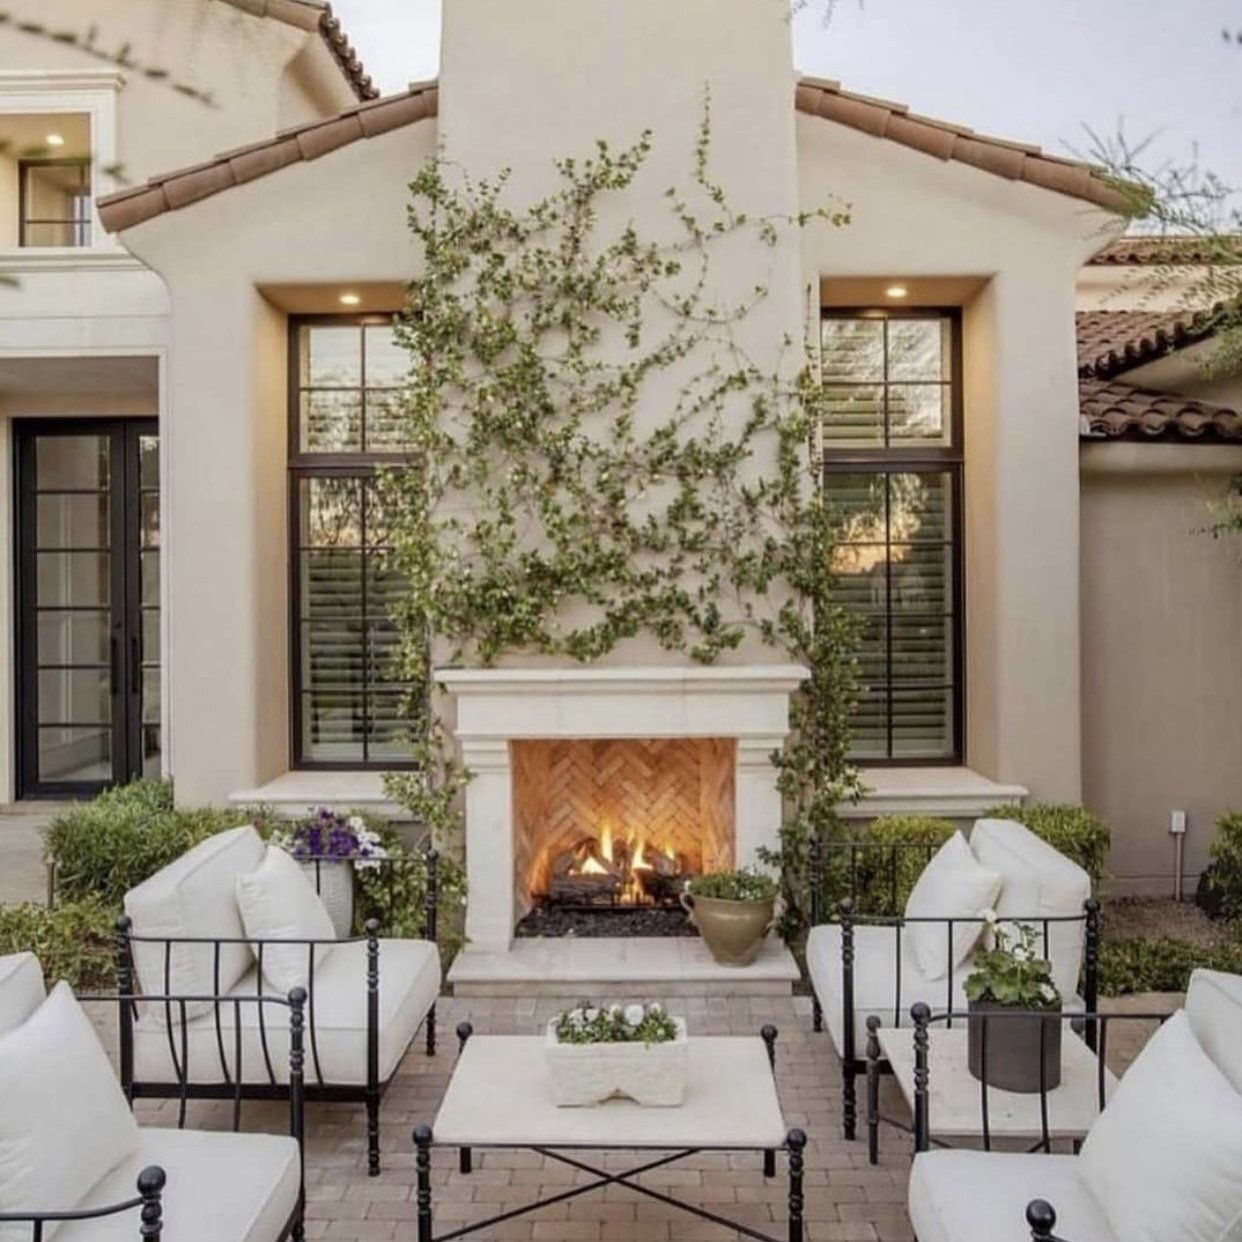 Changing the Game Outdoors. Outdoor fire features can be game-changers for your backyard. We provide the warmth that turns backyards into ultimate comfort zones. #GameChanger🔥

#sweepsnladders #fireplacerenovation #chimneysweeper  #fireplaceremodel 